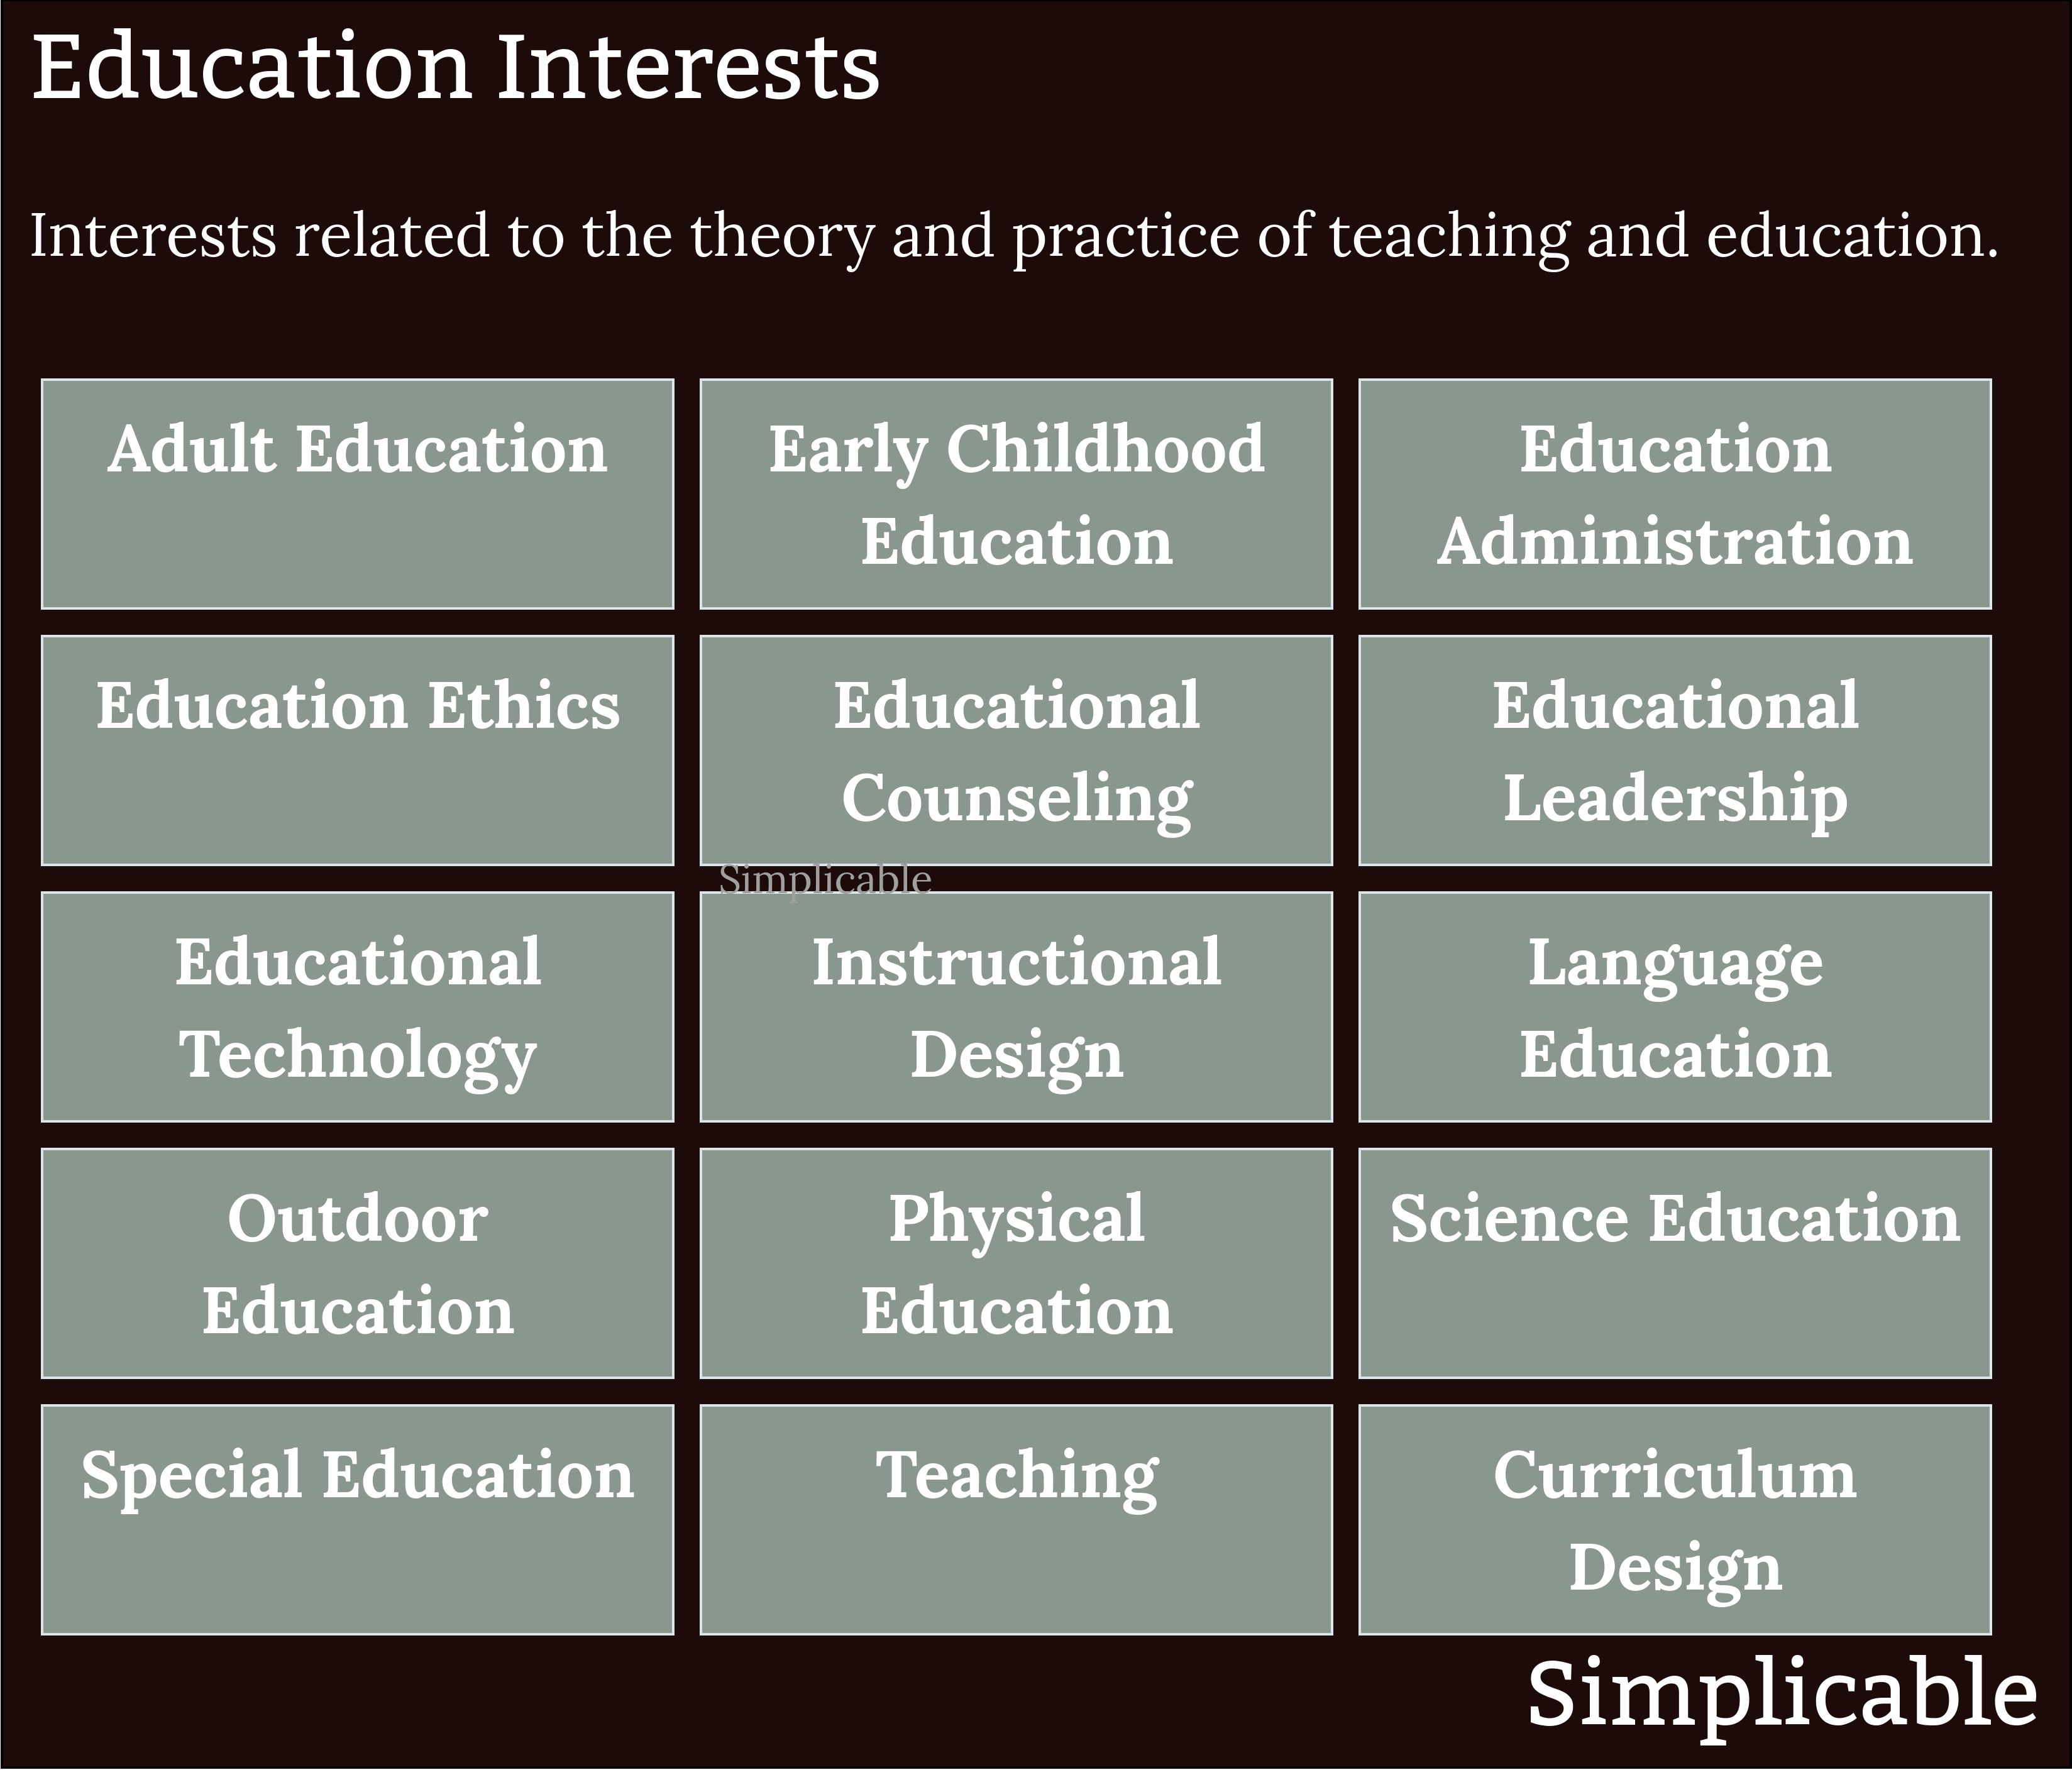 academic interests related to education